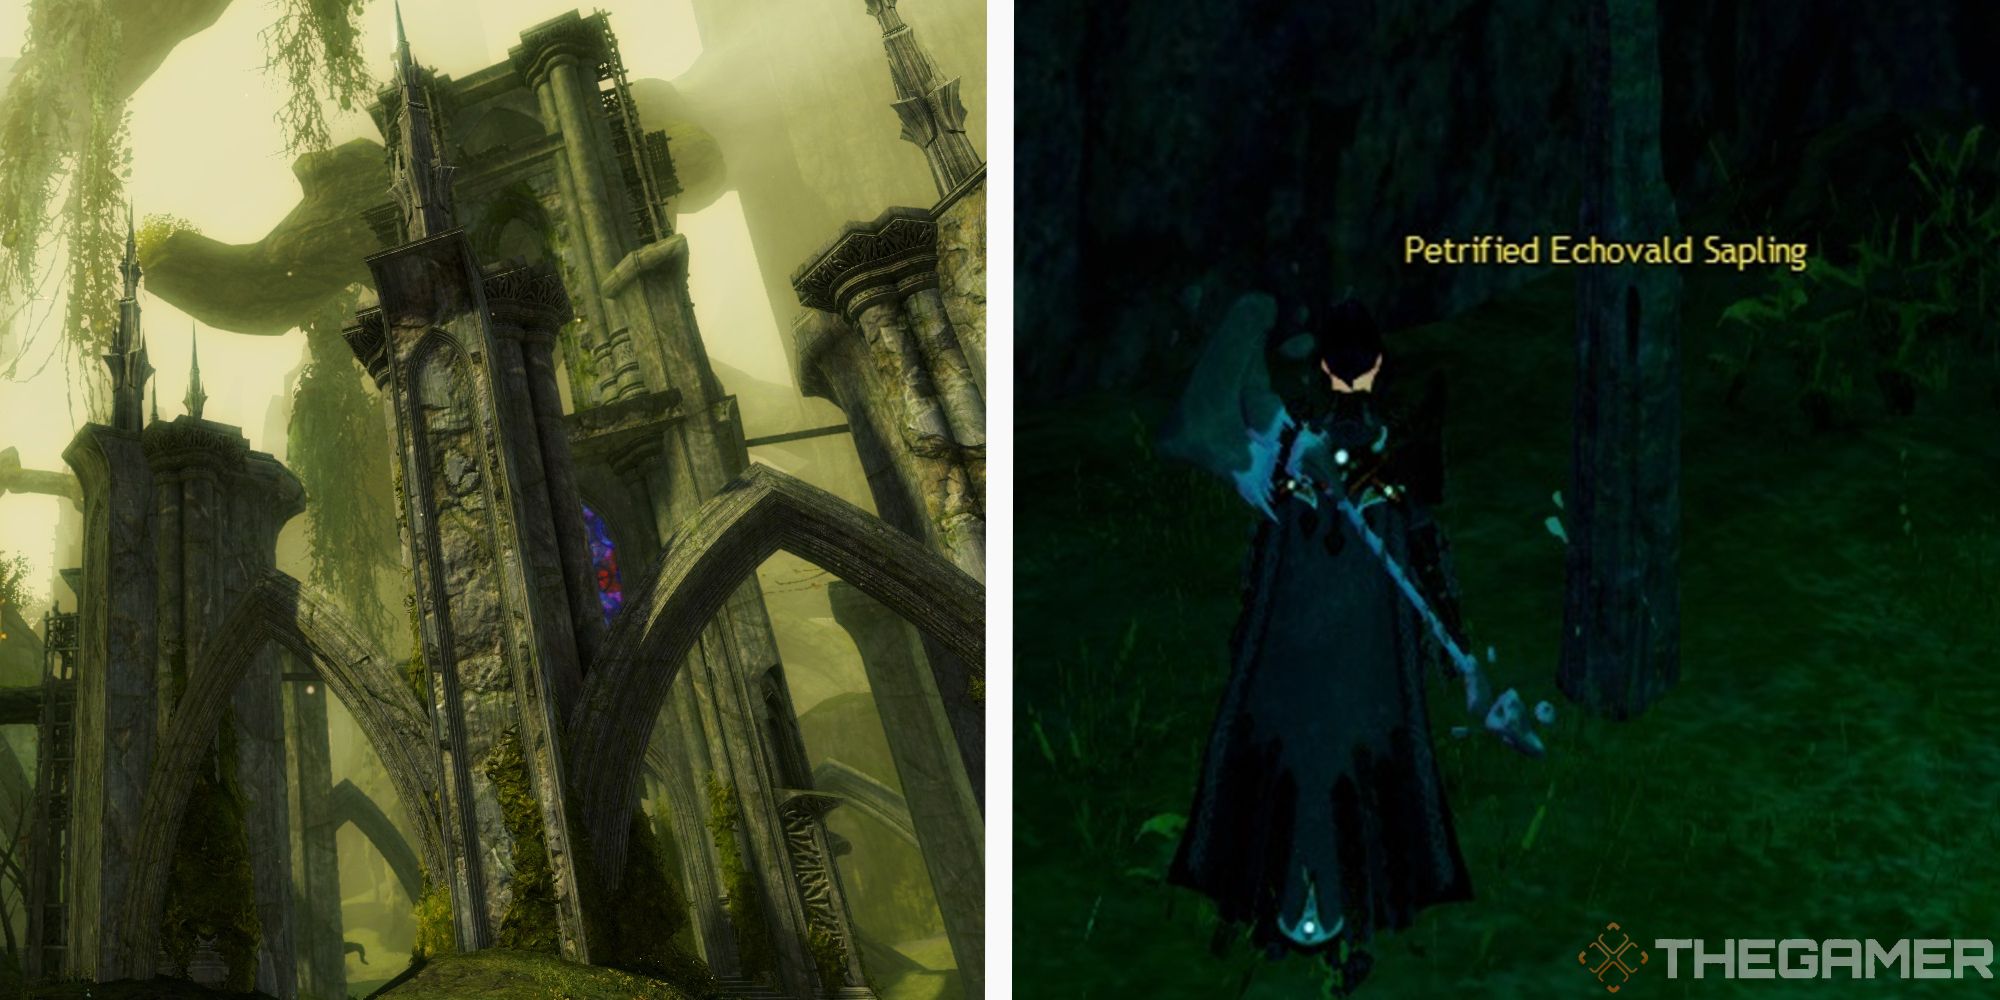 image of echovald wilds next to image of player standing next to petrified echovald sapling